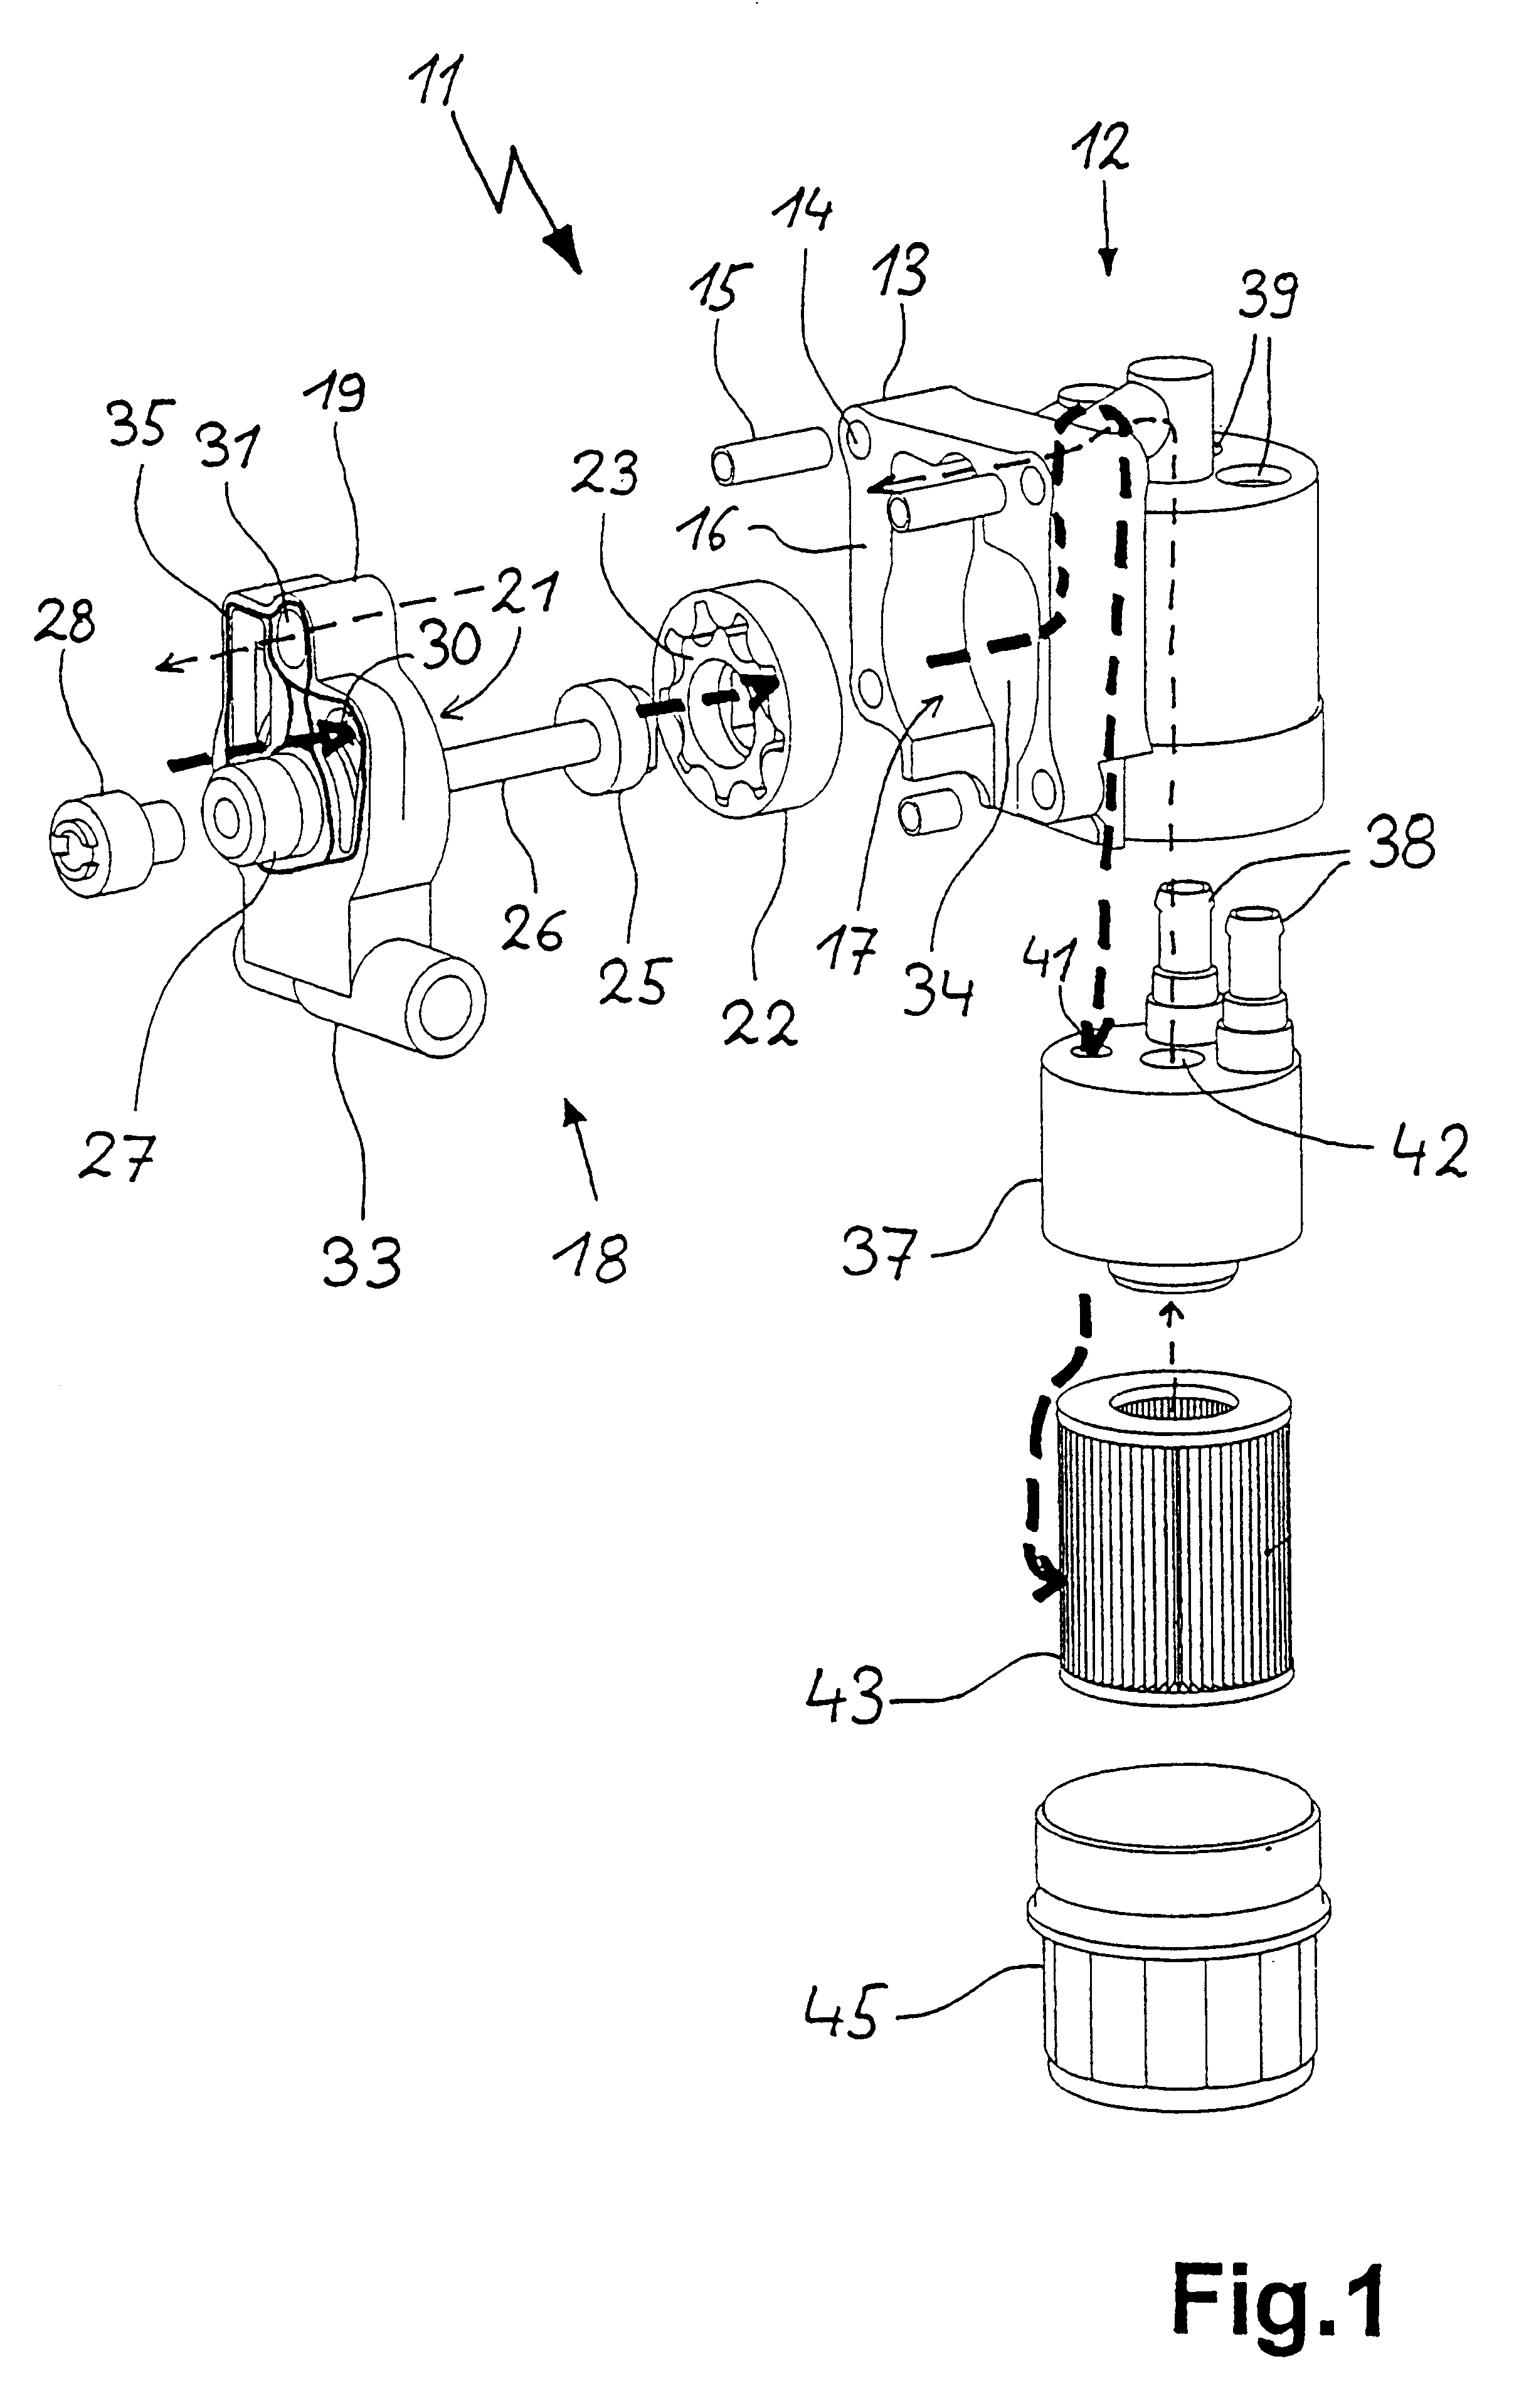 Oil pump module with filter in particular for internal combustion engine lubricating oil